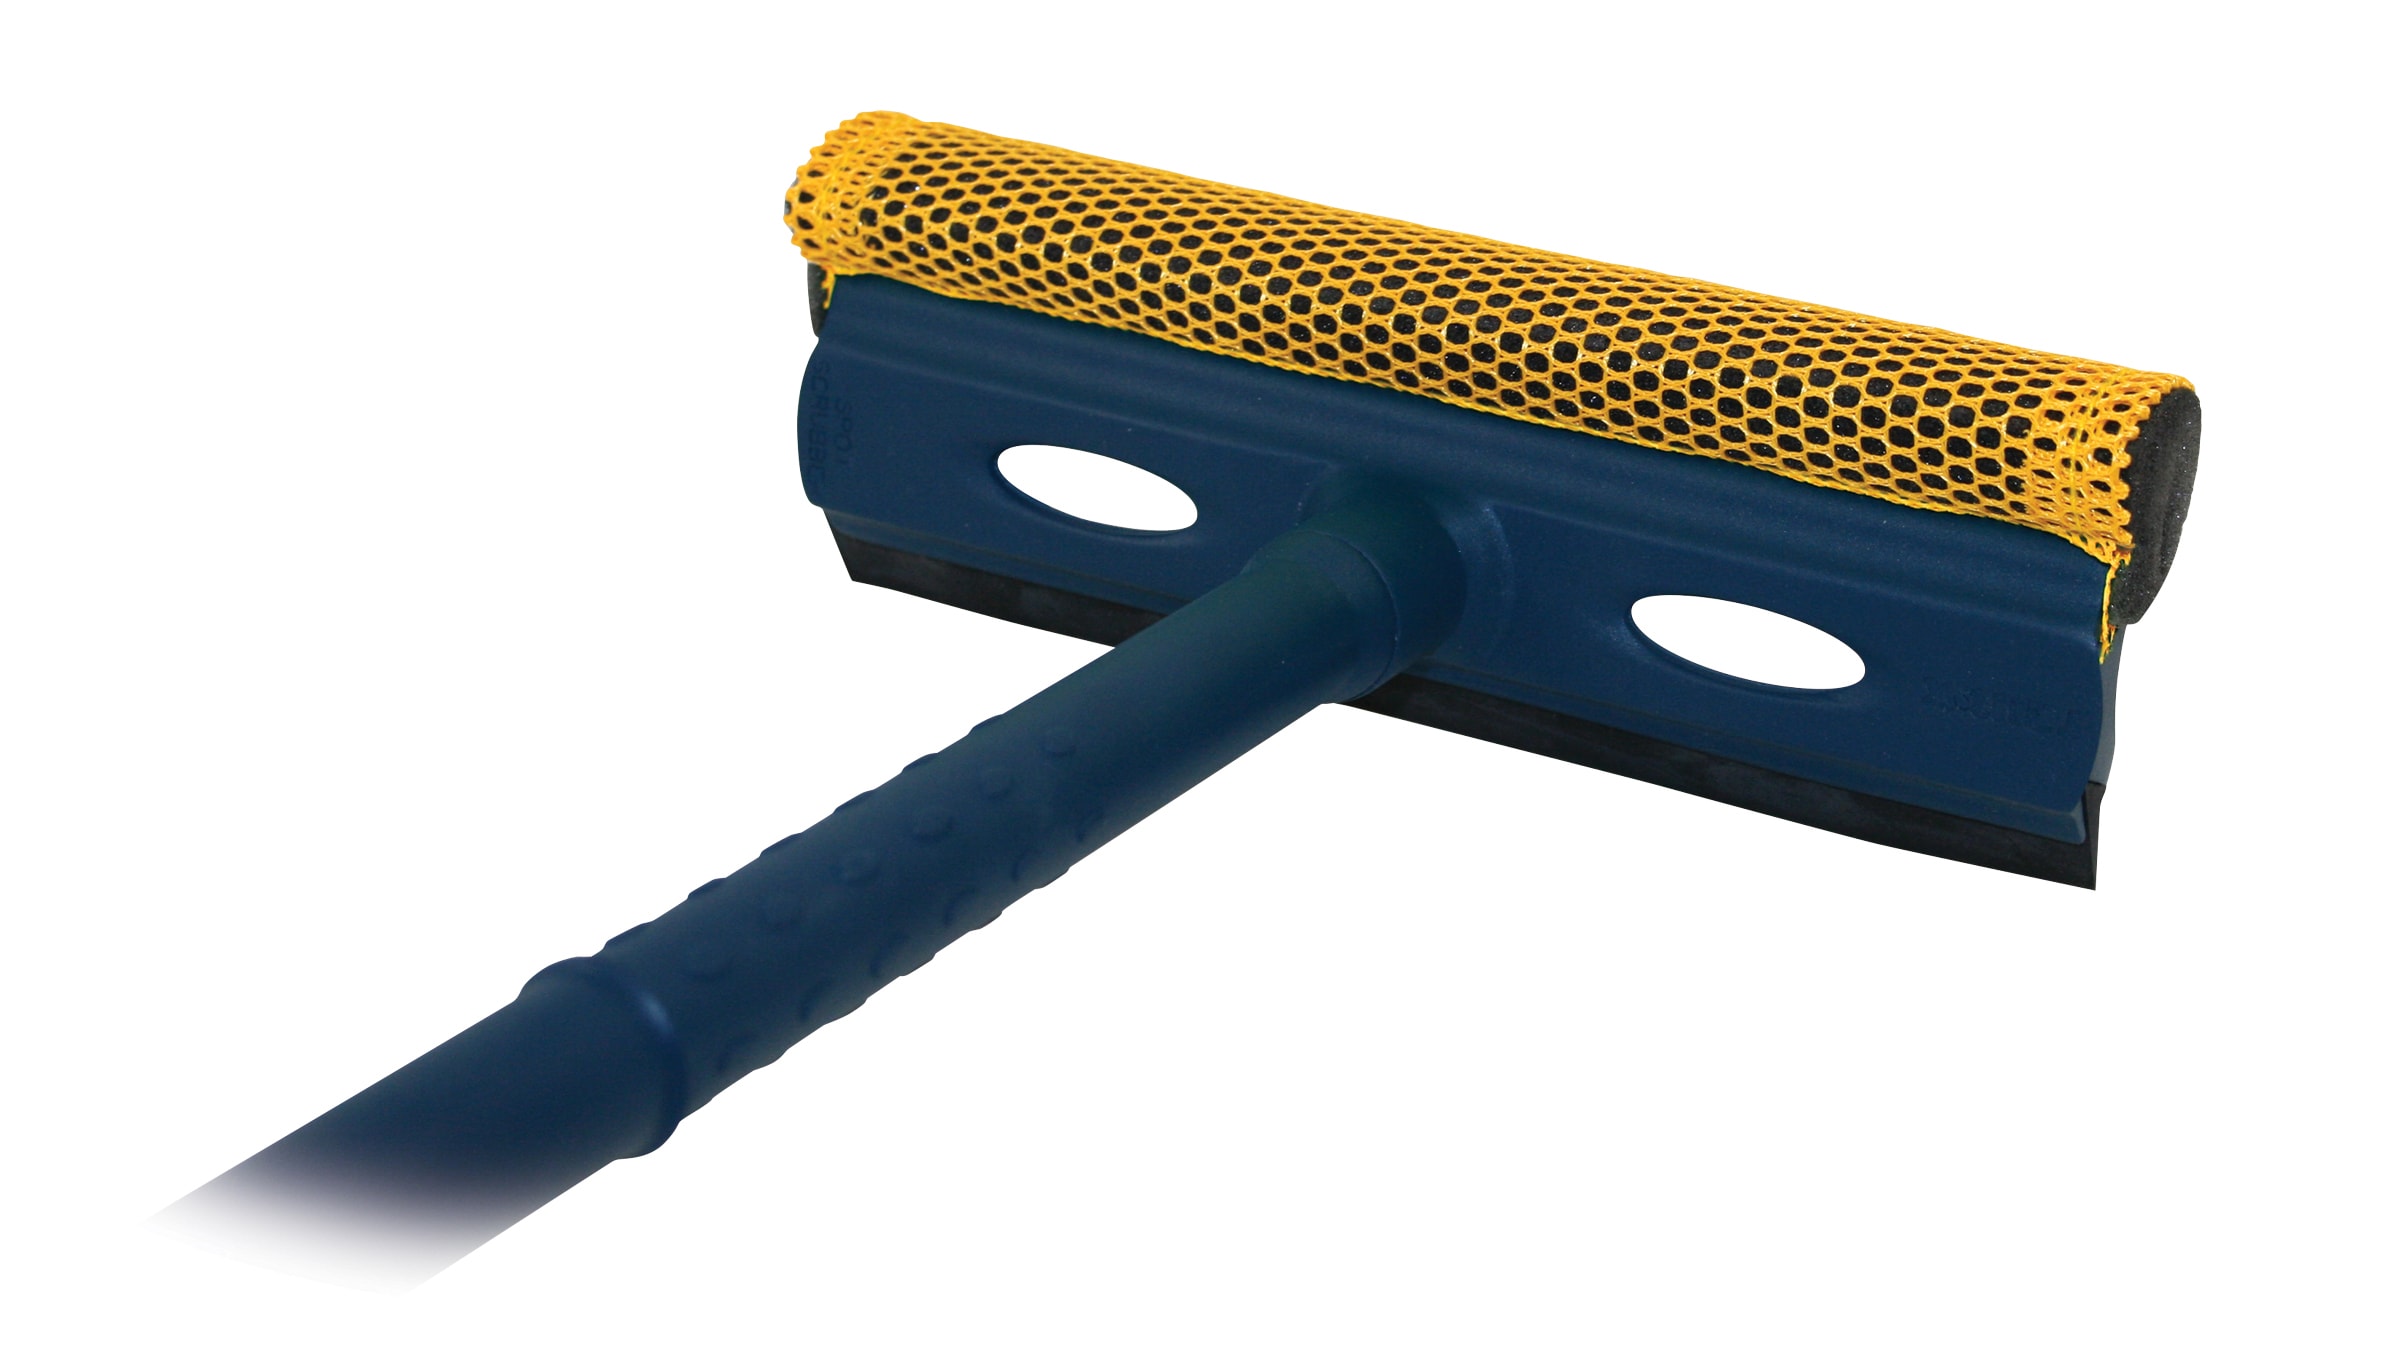 Hygienic Hand Squeegee with replacement cassette, 9.8, Blue 77113